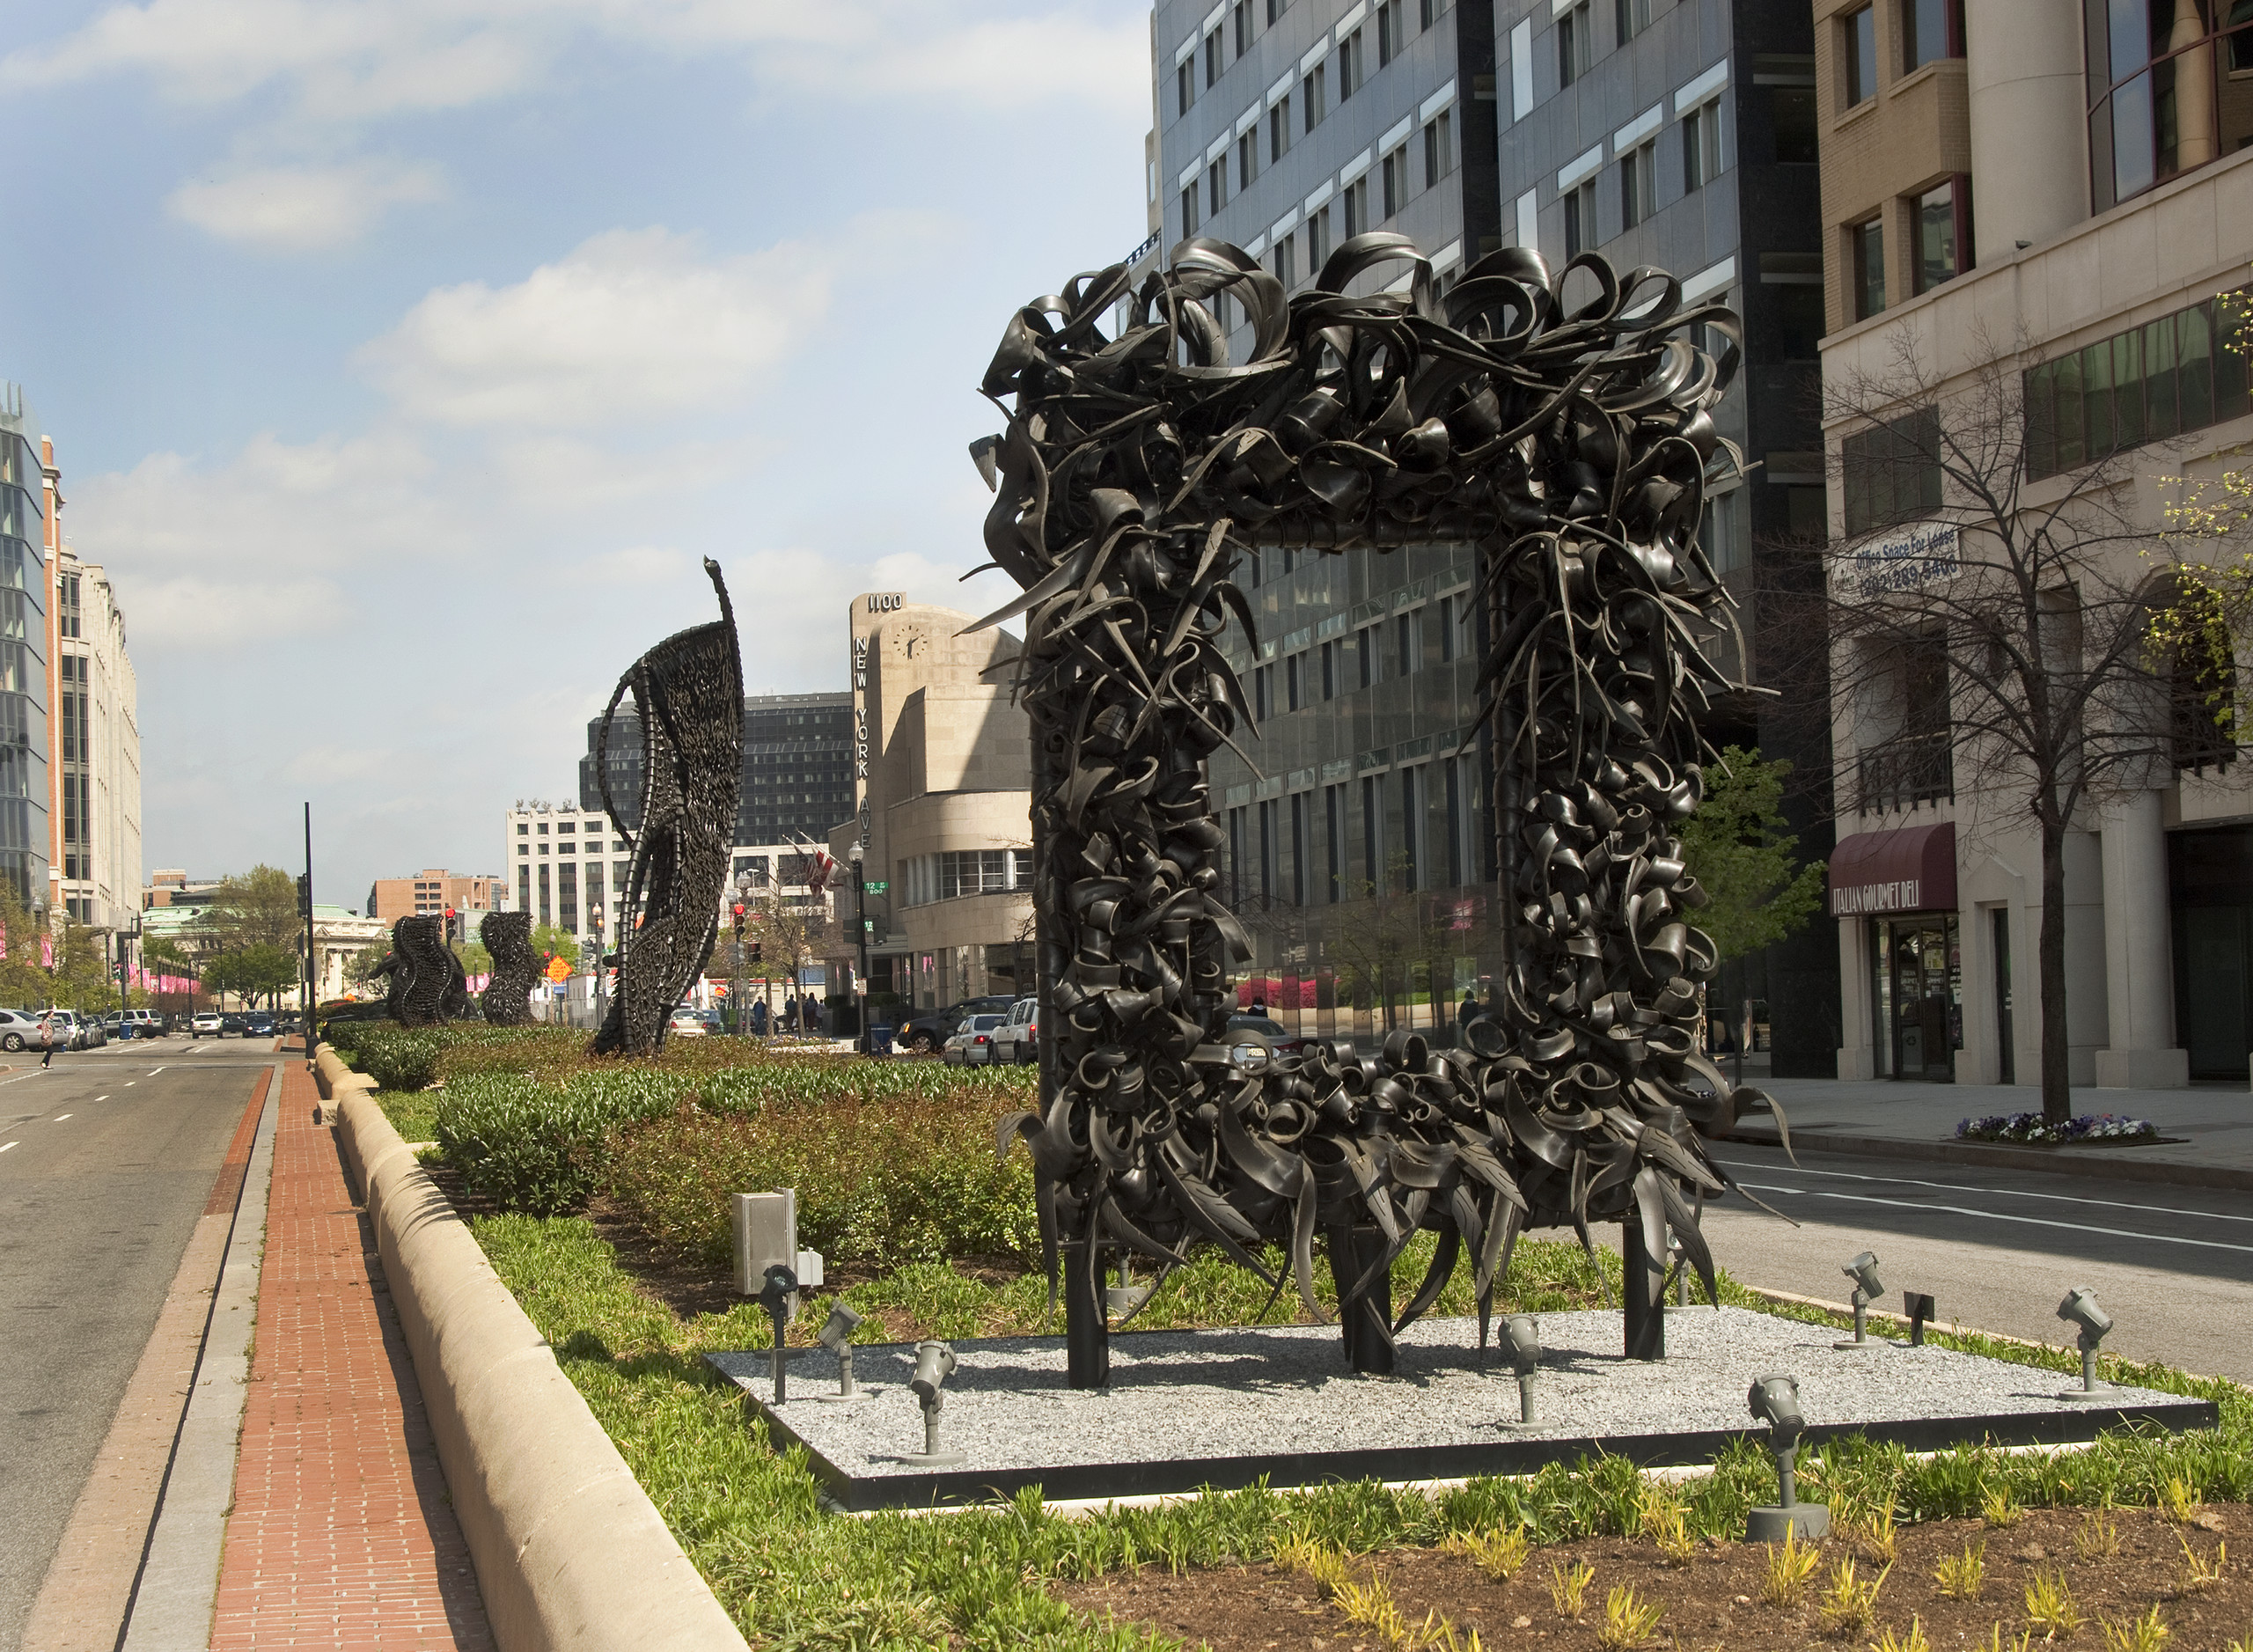 A large metal sculpture stands in the middle of the street, similar to an empty rectangular picture frame. The “frame” is crowded with undulating, coiling metal sculptural elements that occasionally end in spikes. Behind stand three vertical twisting, net-like metal sculptures.